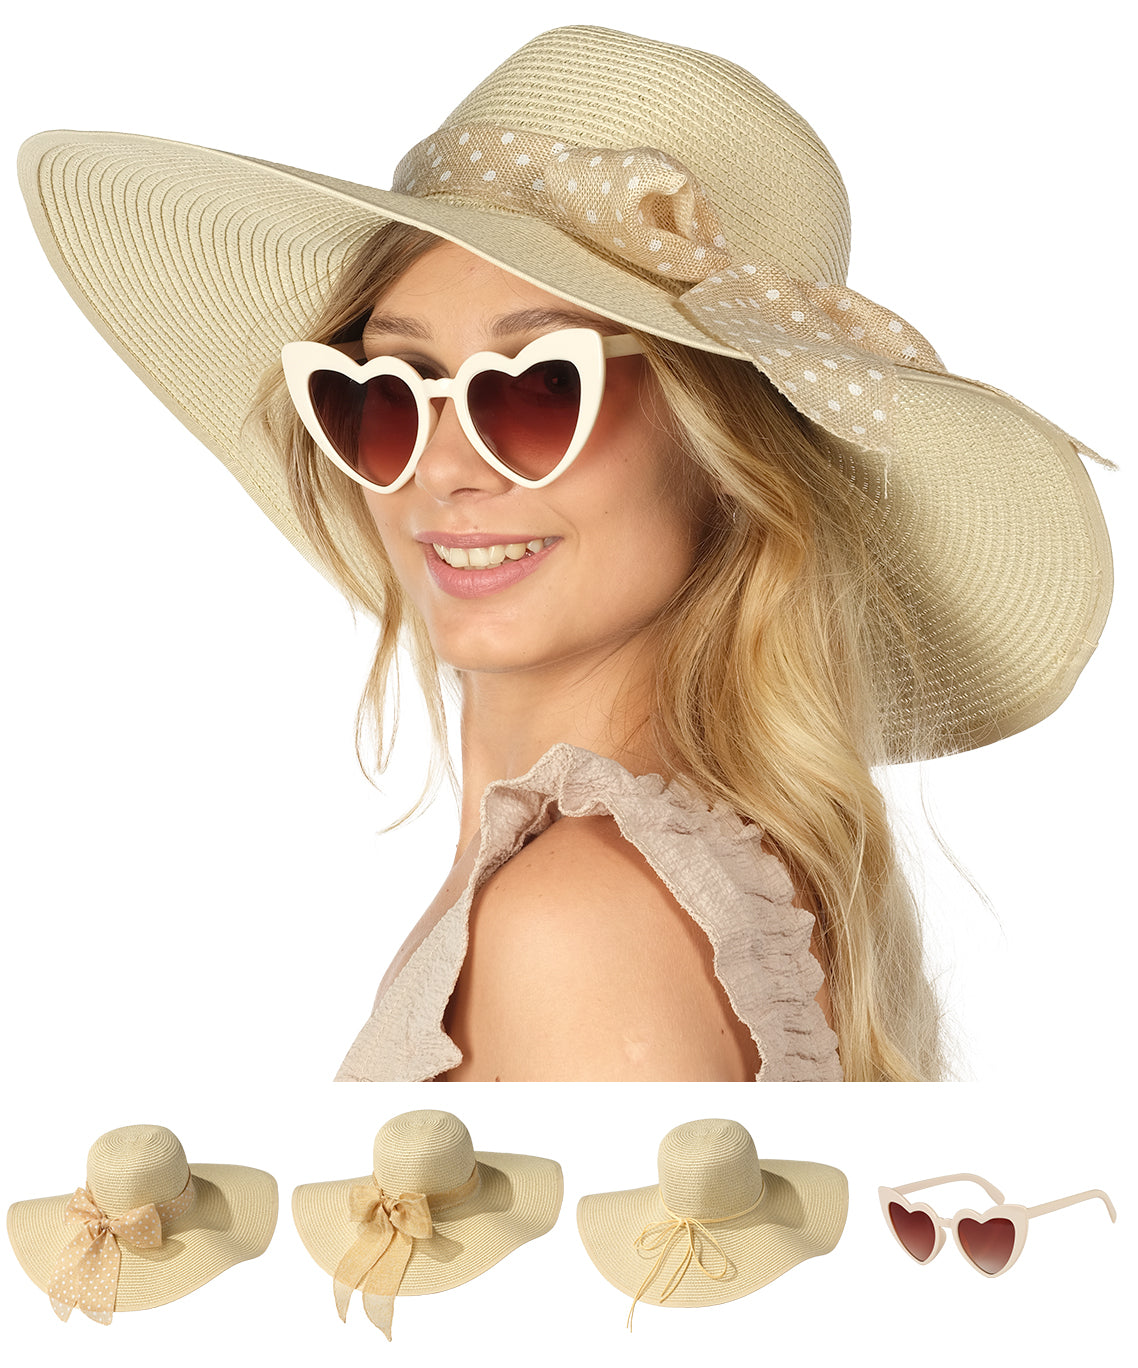 Ivory Panama straw beach hats for women-Packable Sun Hat - Funcredible